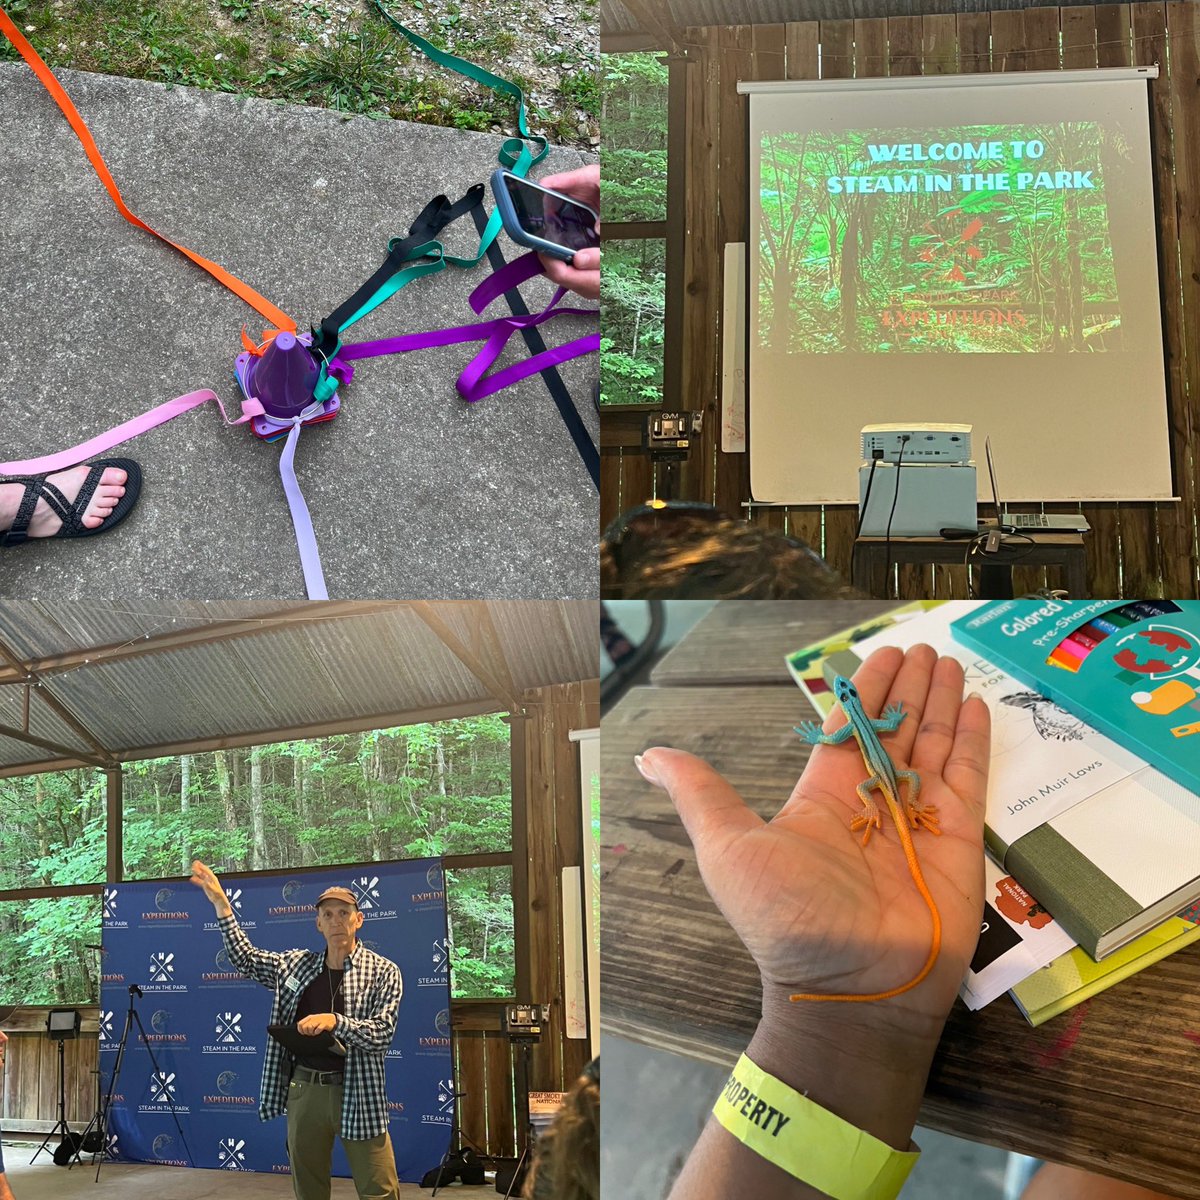 AMAZING first night at #STEAMinthePark! I’ve only been here for a few hours and I’m already blown away! Looking forward to a great week of learning and building relationships! @MrSmith_LES @BurrisWhittney, and Cara Kirkland! @GMASteam